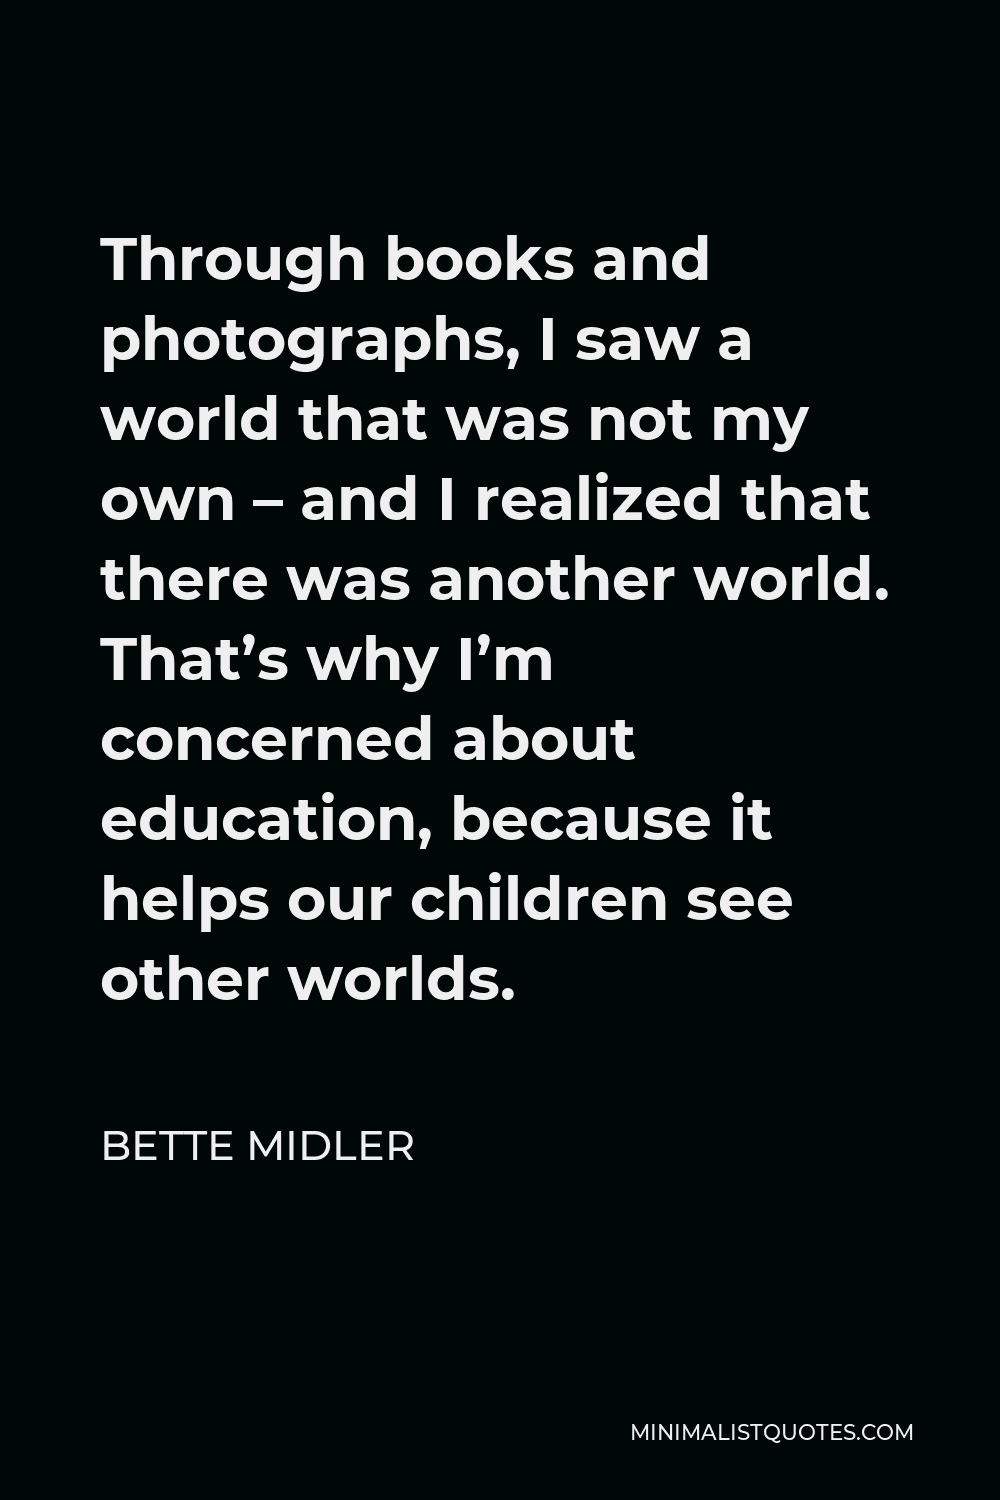 Bette Midler Quote - Through books and photographs, I saw a world that was not my own – and I realized that there was another world.